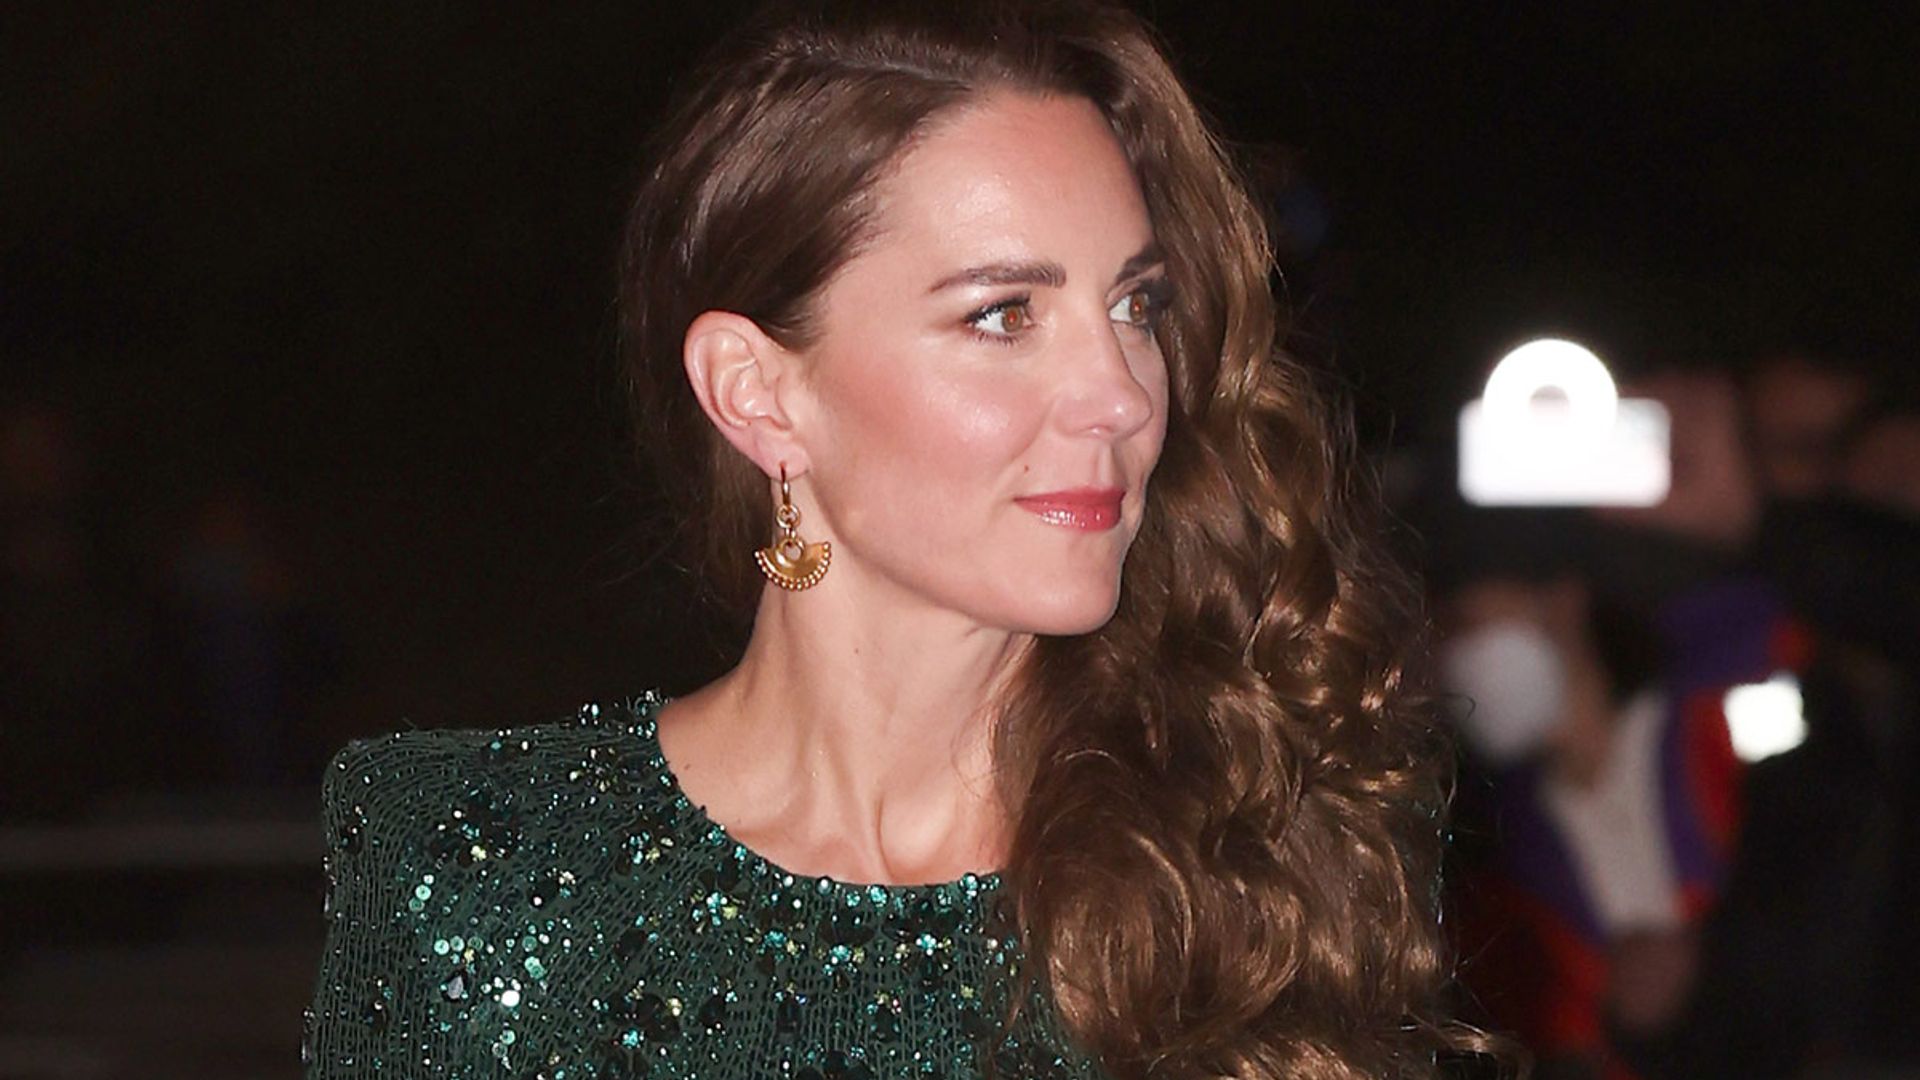 Kate Middleton is the picture of elegance in glittery green gown at Royal Variety Performance